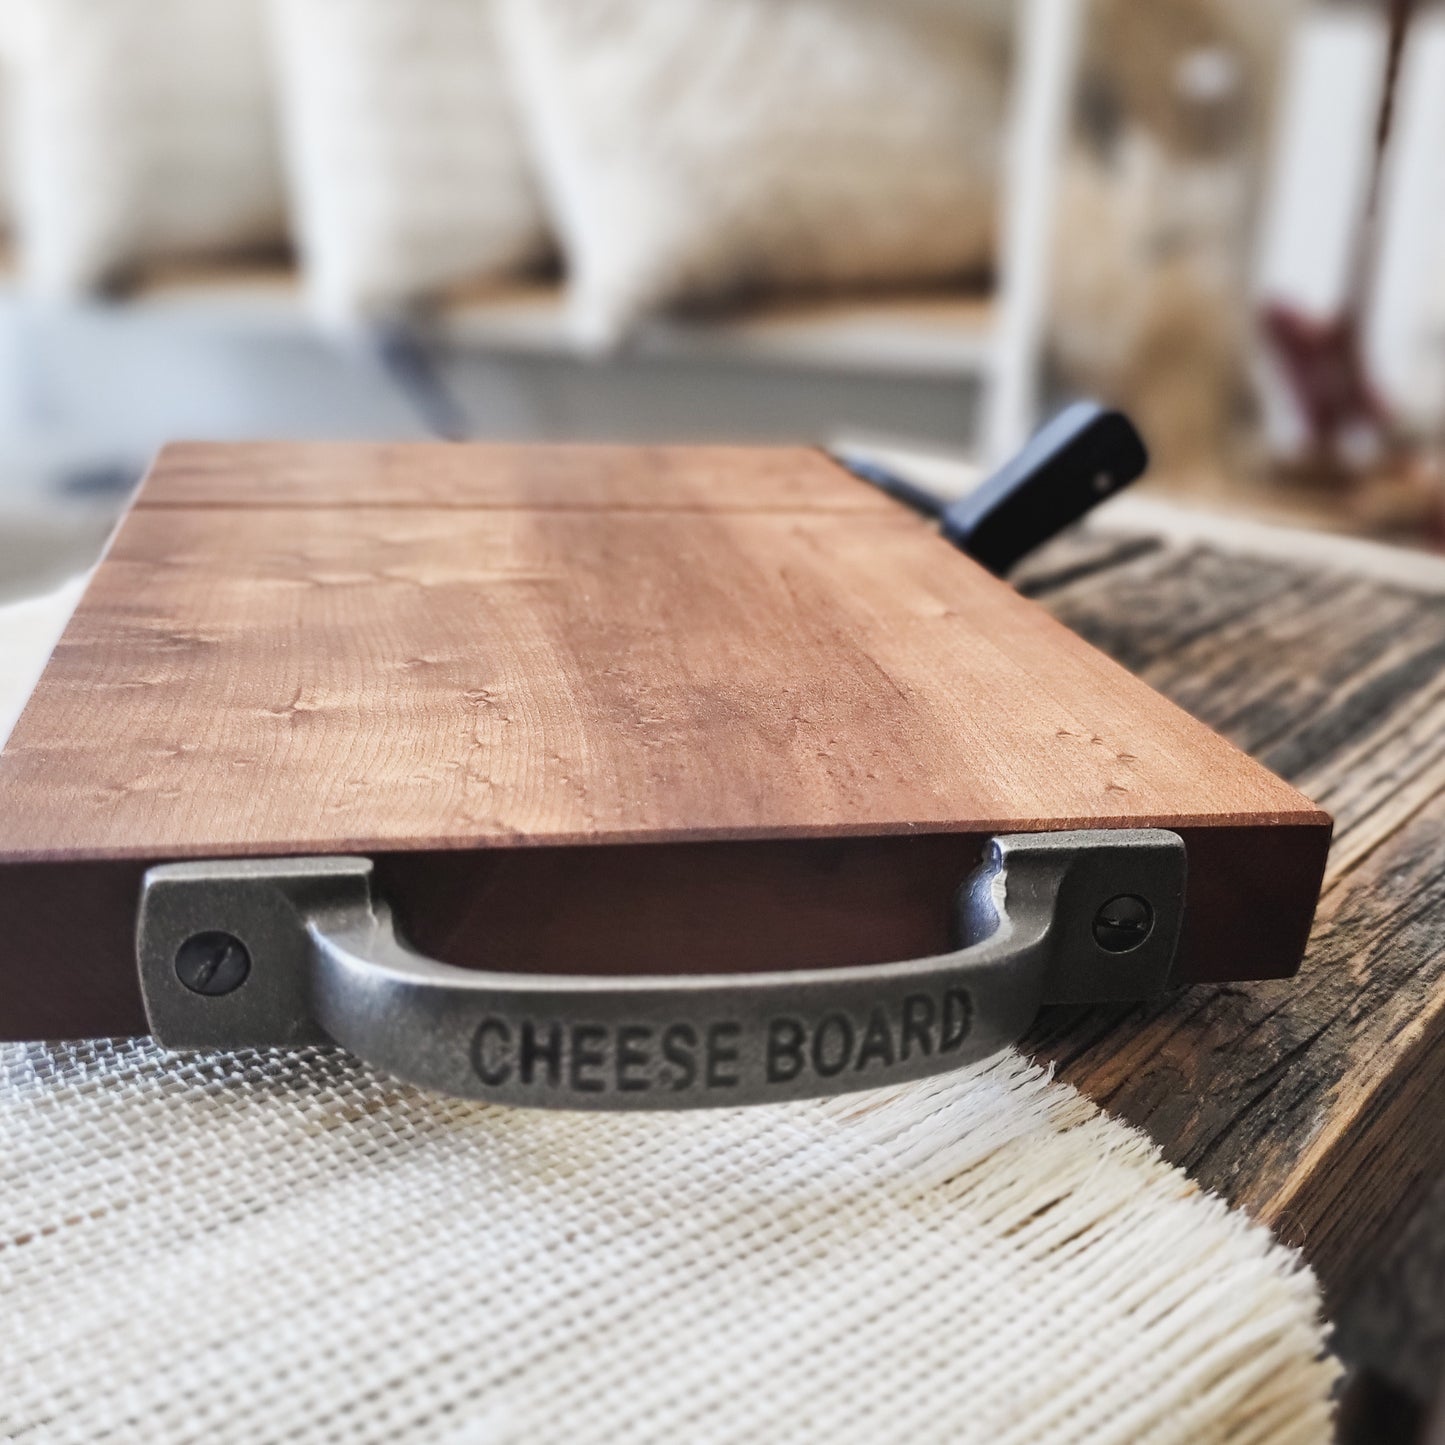 Artisan Cheeseboard with Wire Slicer